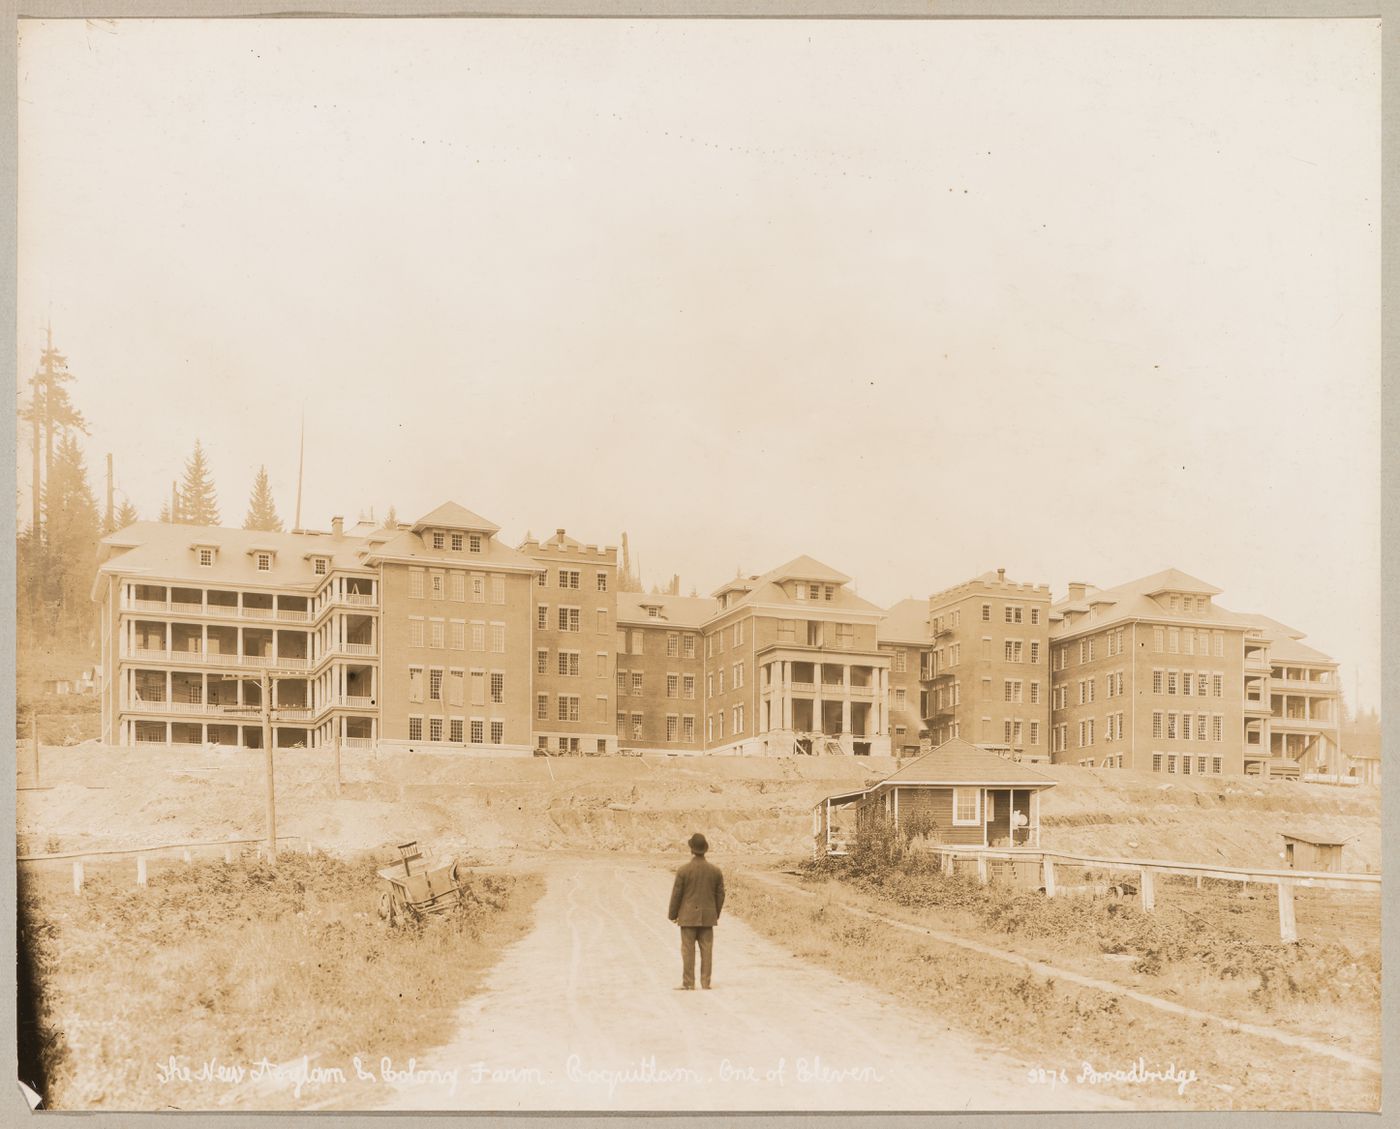 View of principal façade of the Provincial Asylum with the Provincial Government Demonstration Farm (also known as the Colony Farm) on the right, Coquitlam (now Port Coquitlam), British Columbia, Canada